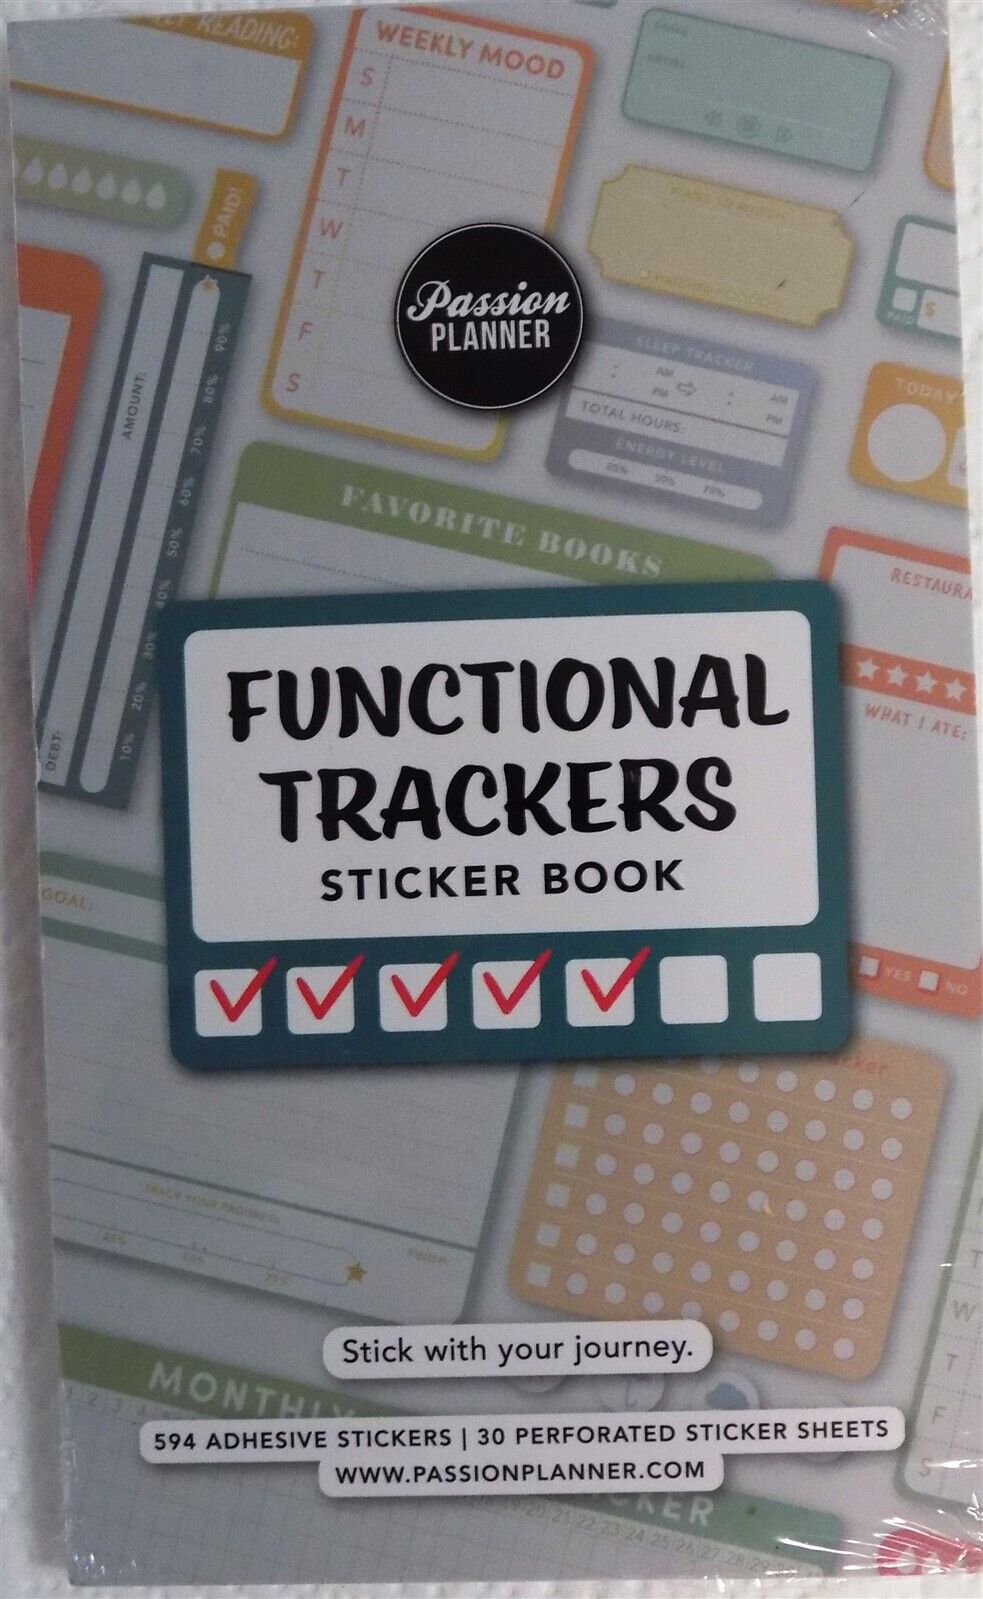 Digital Functional Trackers Sticker Book 594 Adhesive Stickers Passion Planner